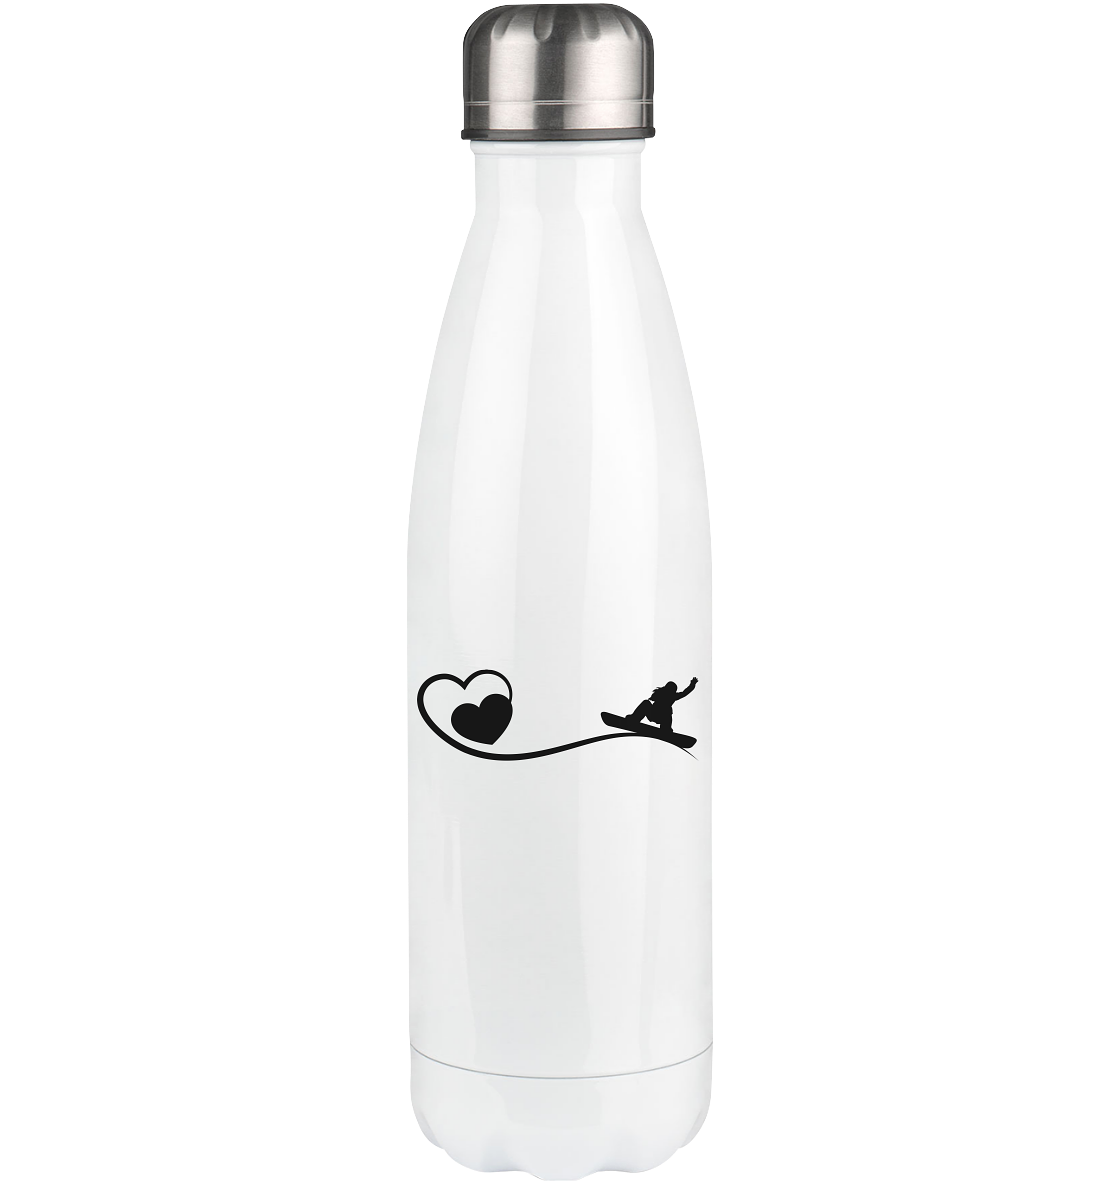 Heart and Snowboarding - Edelstahl Thermosflasche snowboarden 500ml